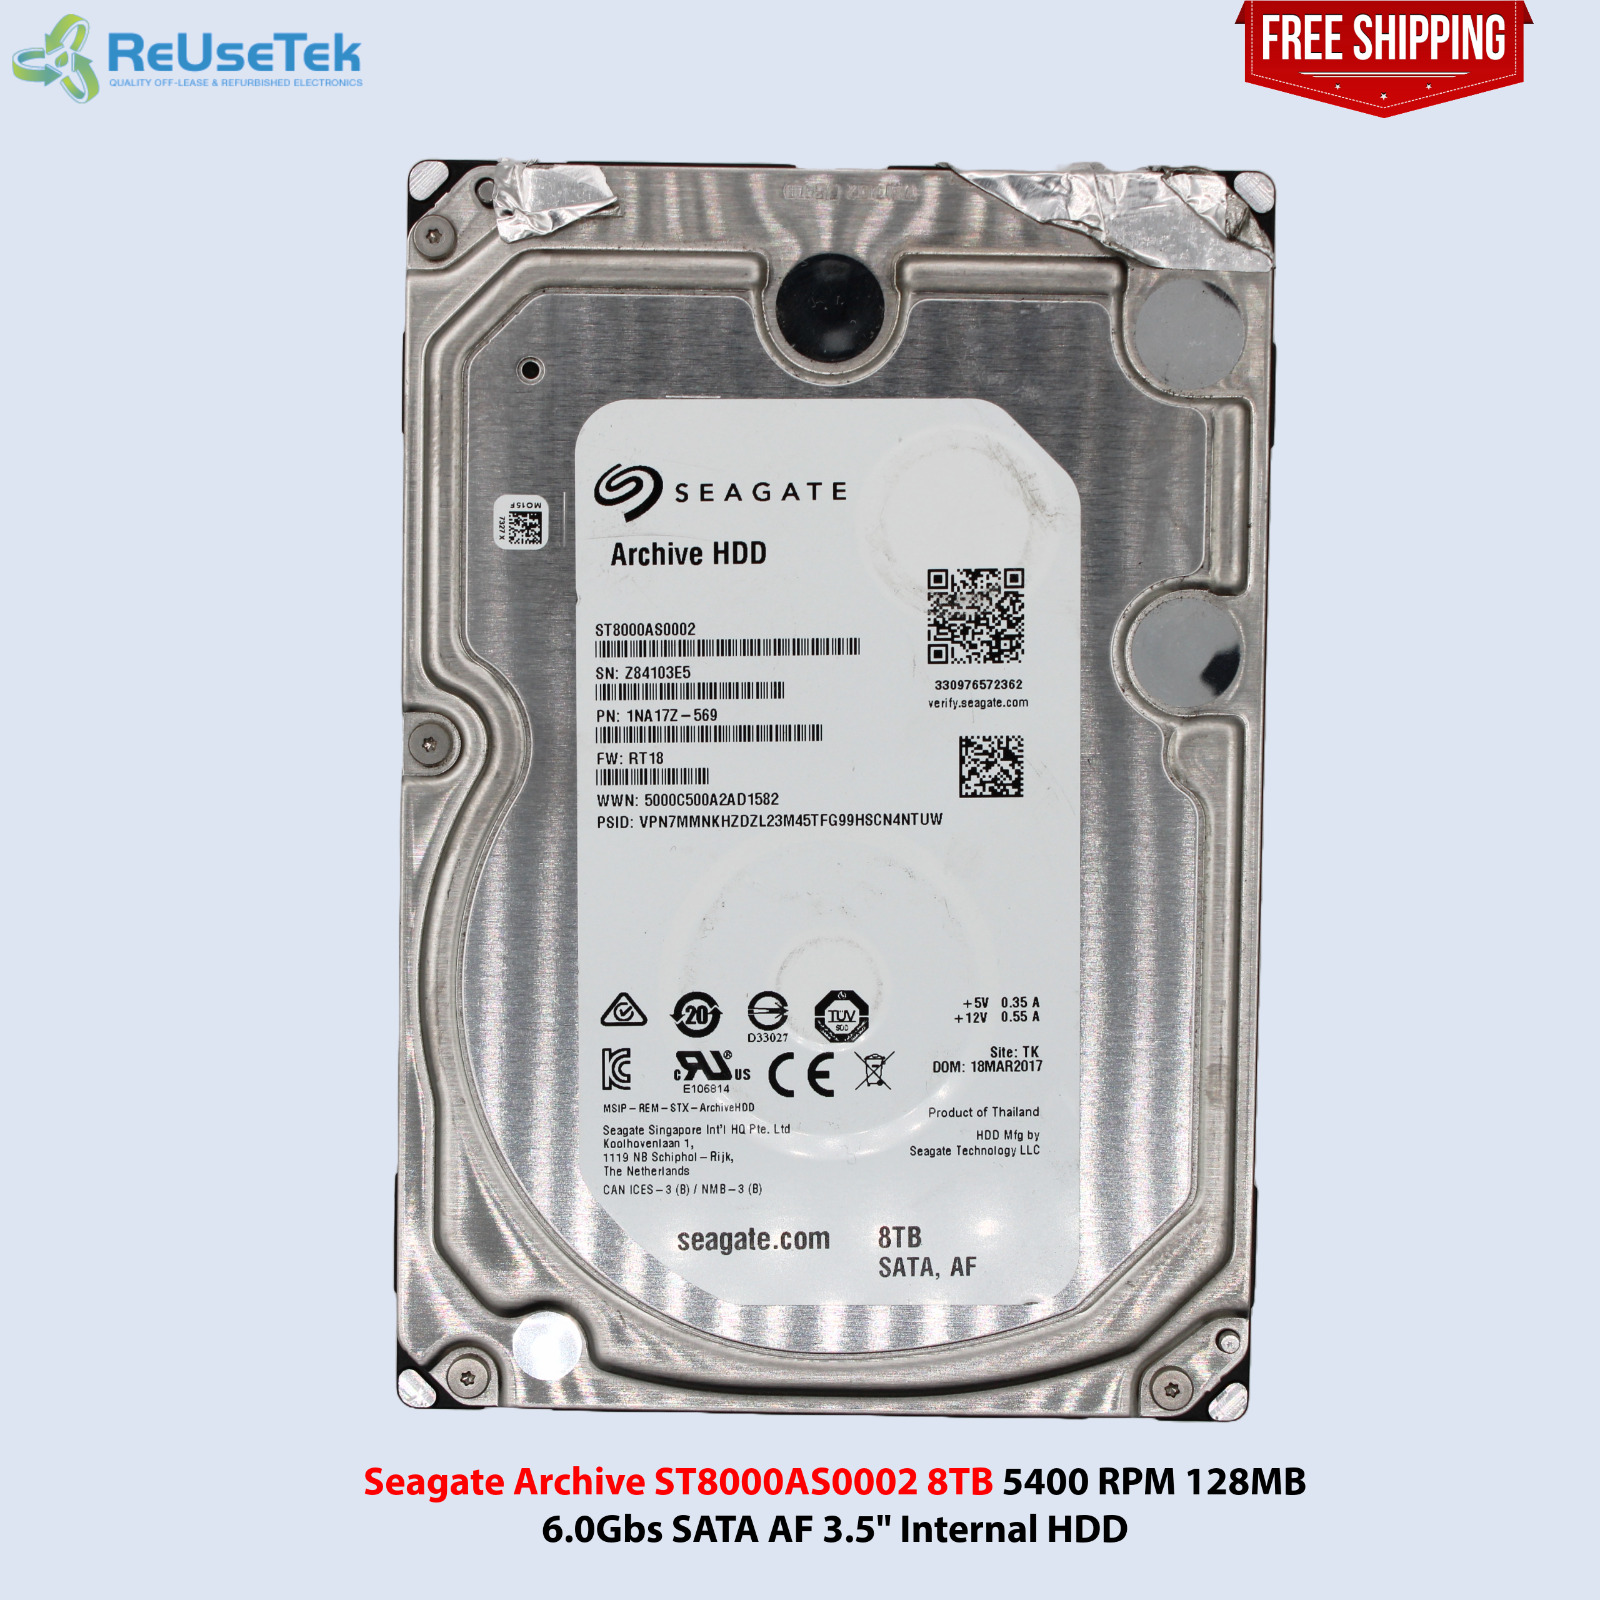 Seagate Archive ST8000AS0002 8TB 5400 RPM 128MB 6.0Gbs SATA AF 3.5